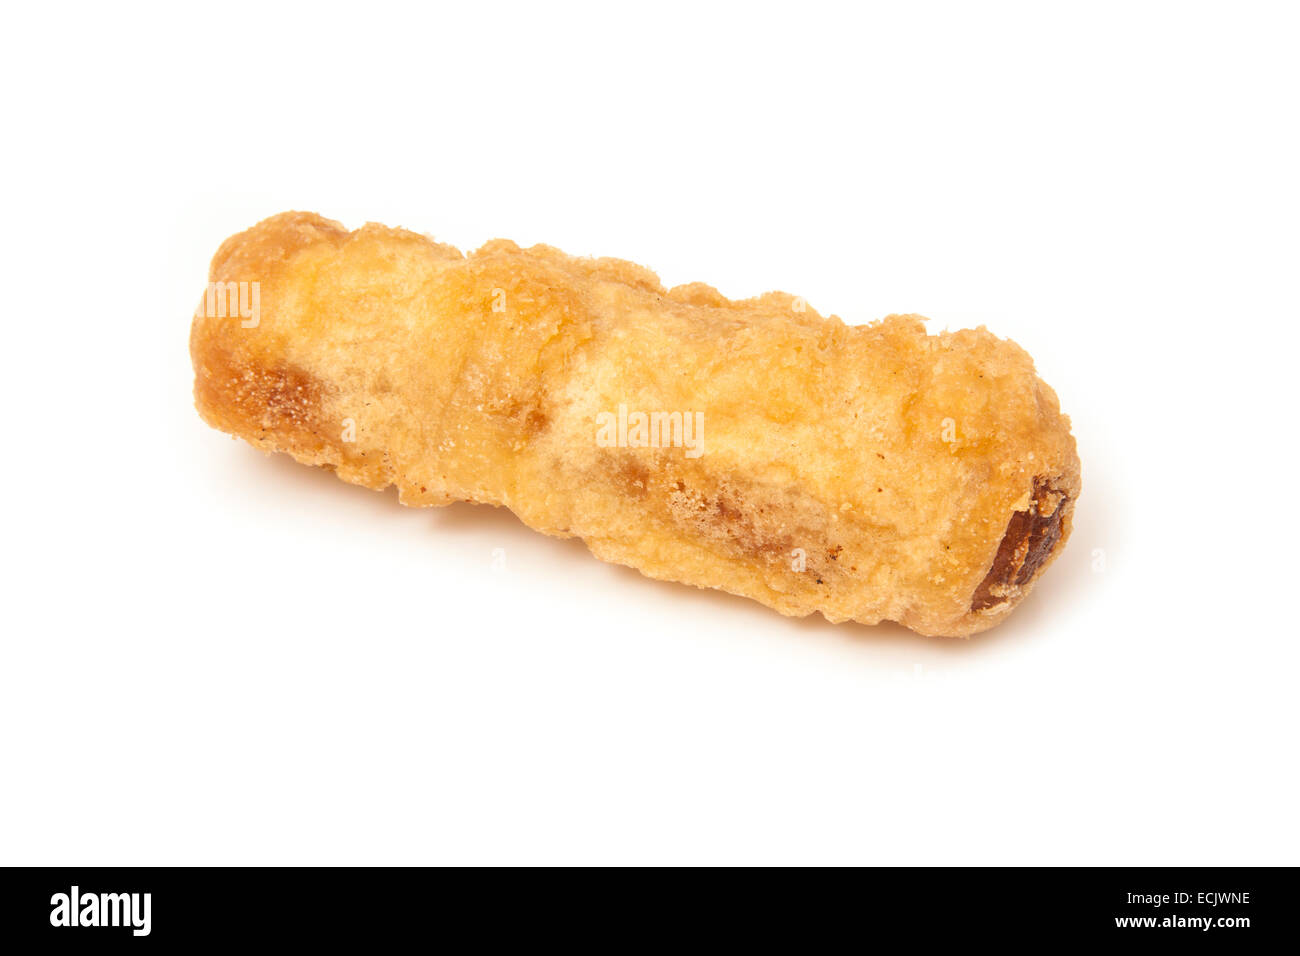 Deep fried sausage fresh from the fish and chip shop. Stock Photo